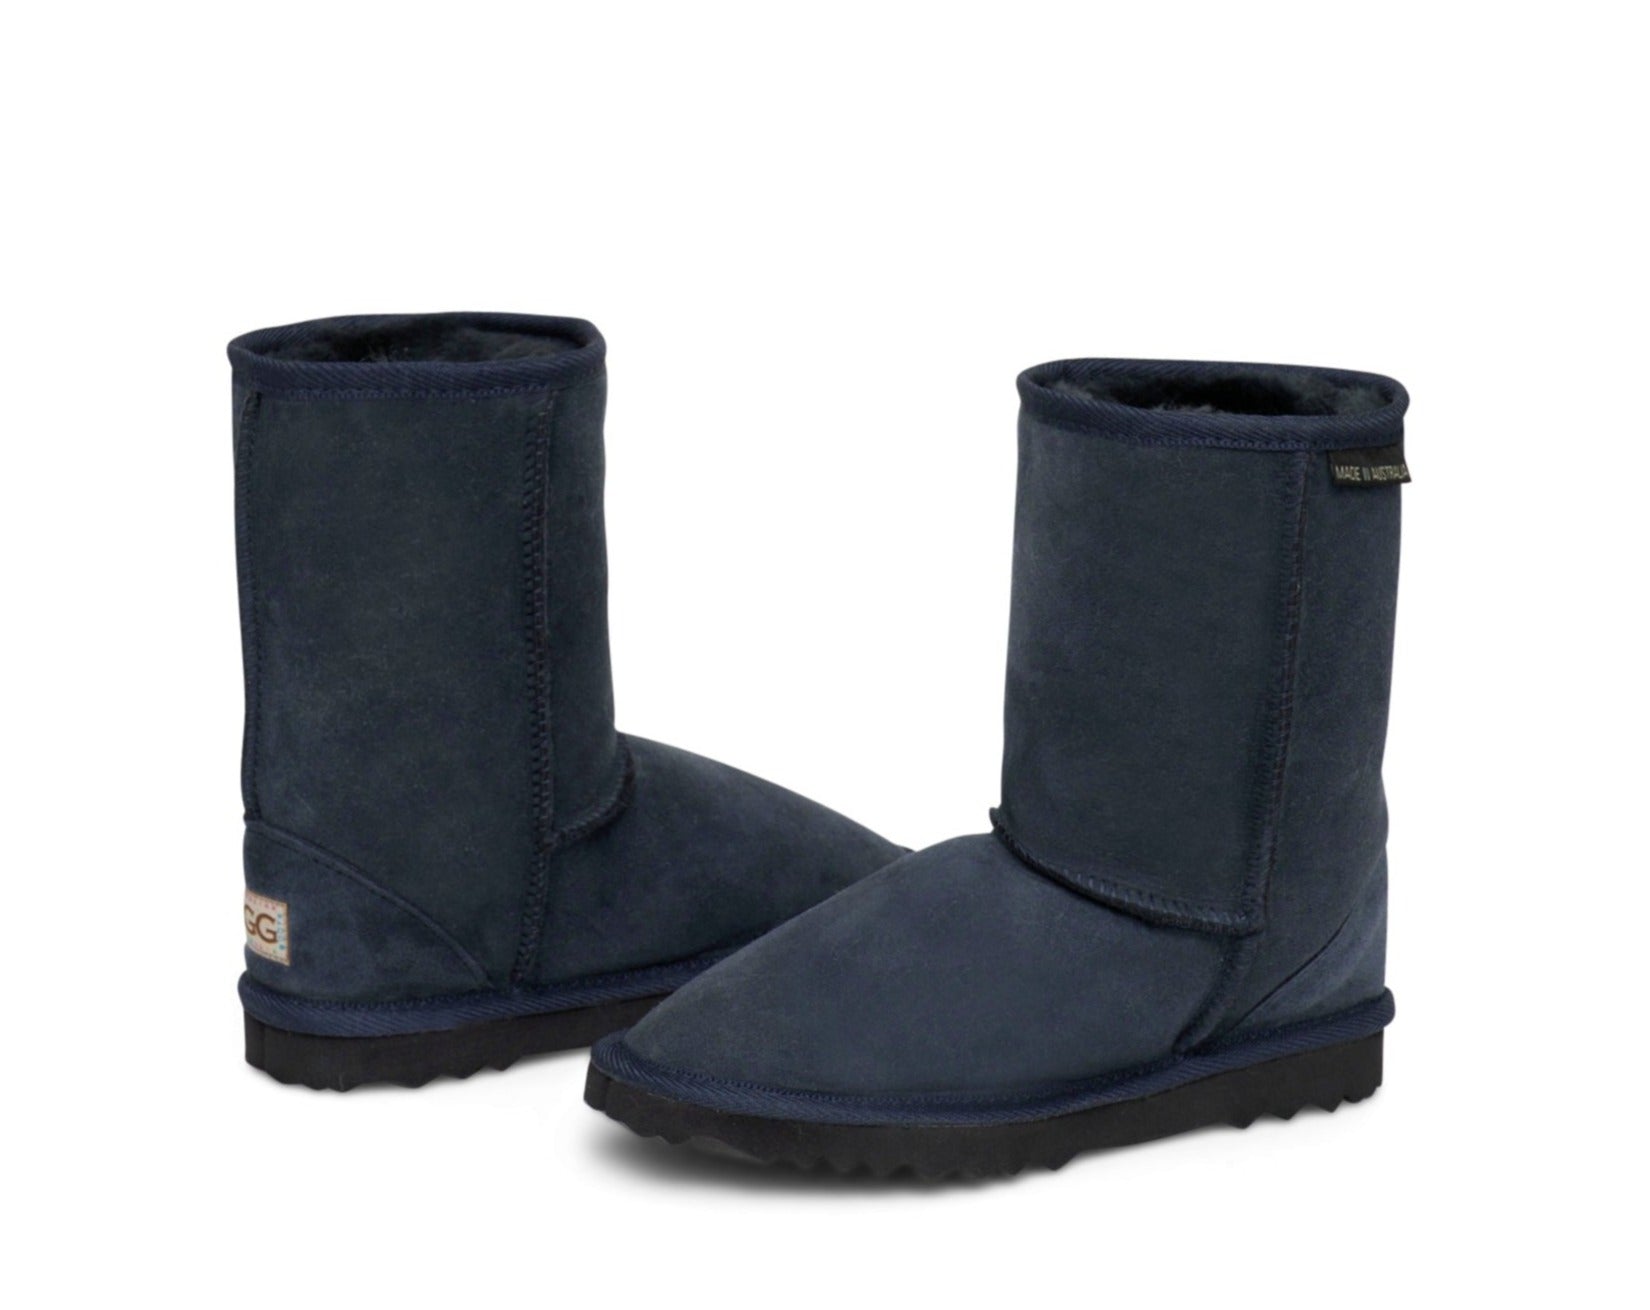 Kid's Classic Ugg Boots in Navy